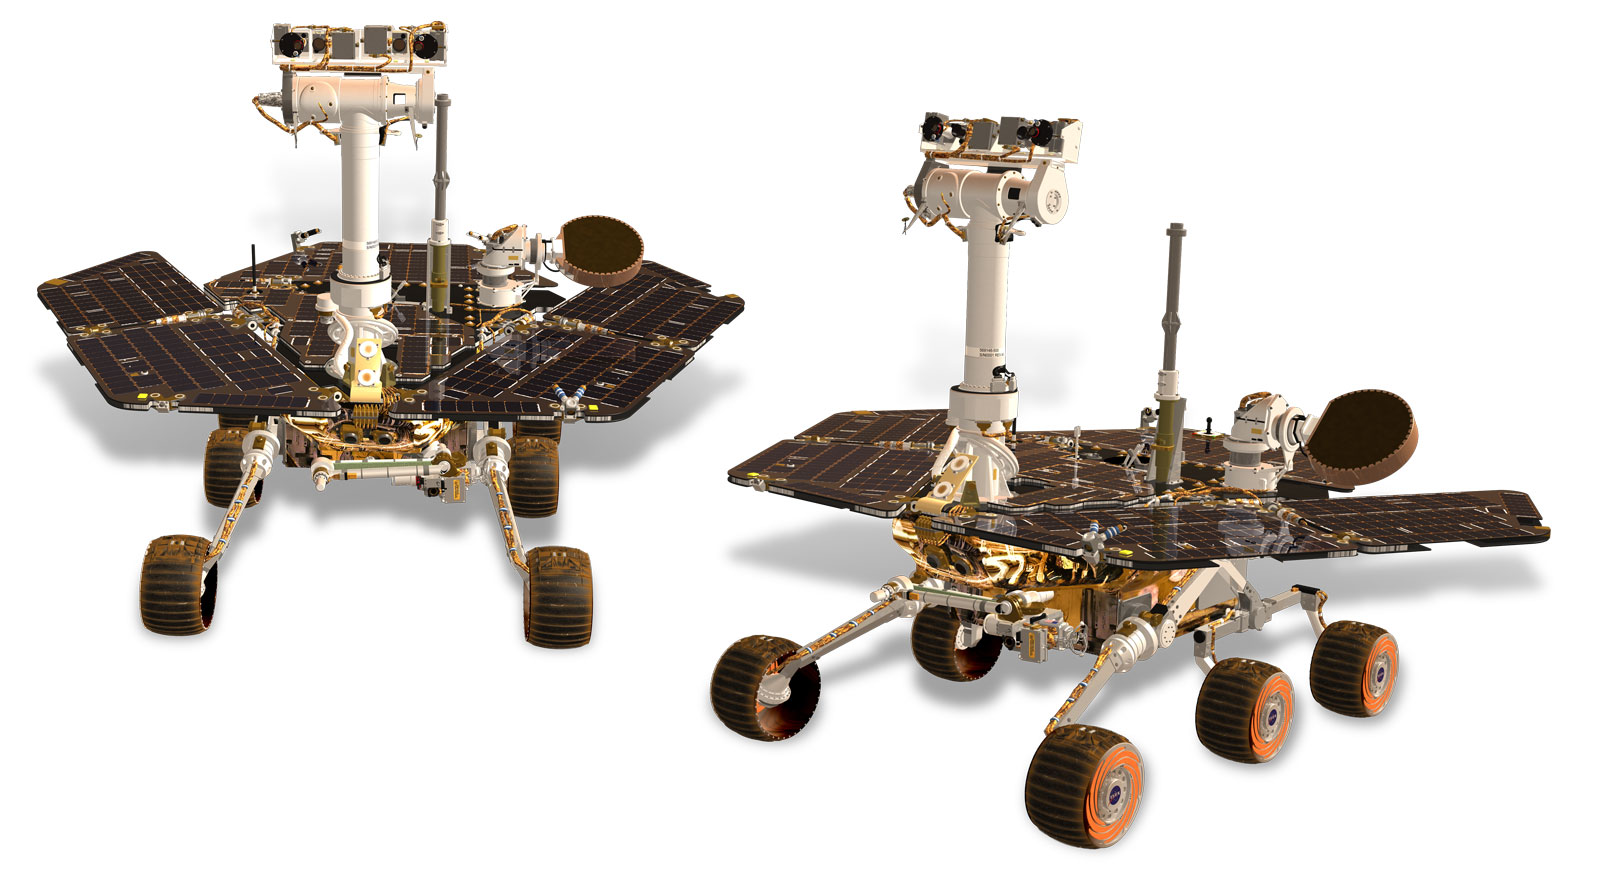 This artist's rendering depicts NASA's Mars Exploration Rovers, Spirit and Opportunity. The twin rovers were launched in 2003 and arrived on Mars in January 2004.